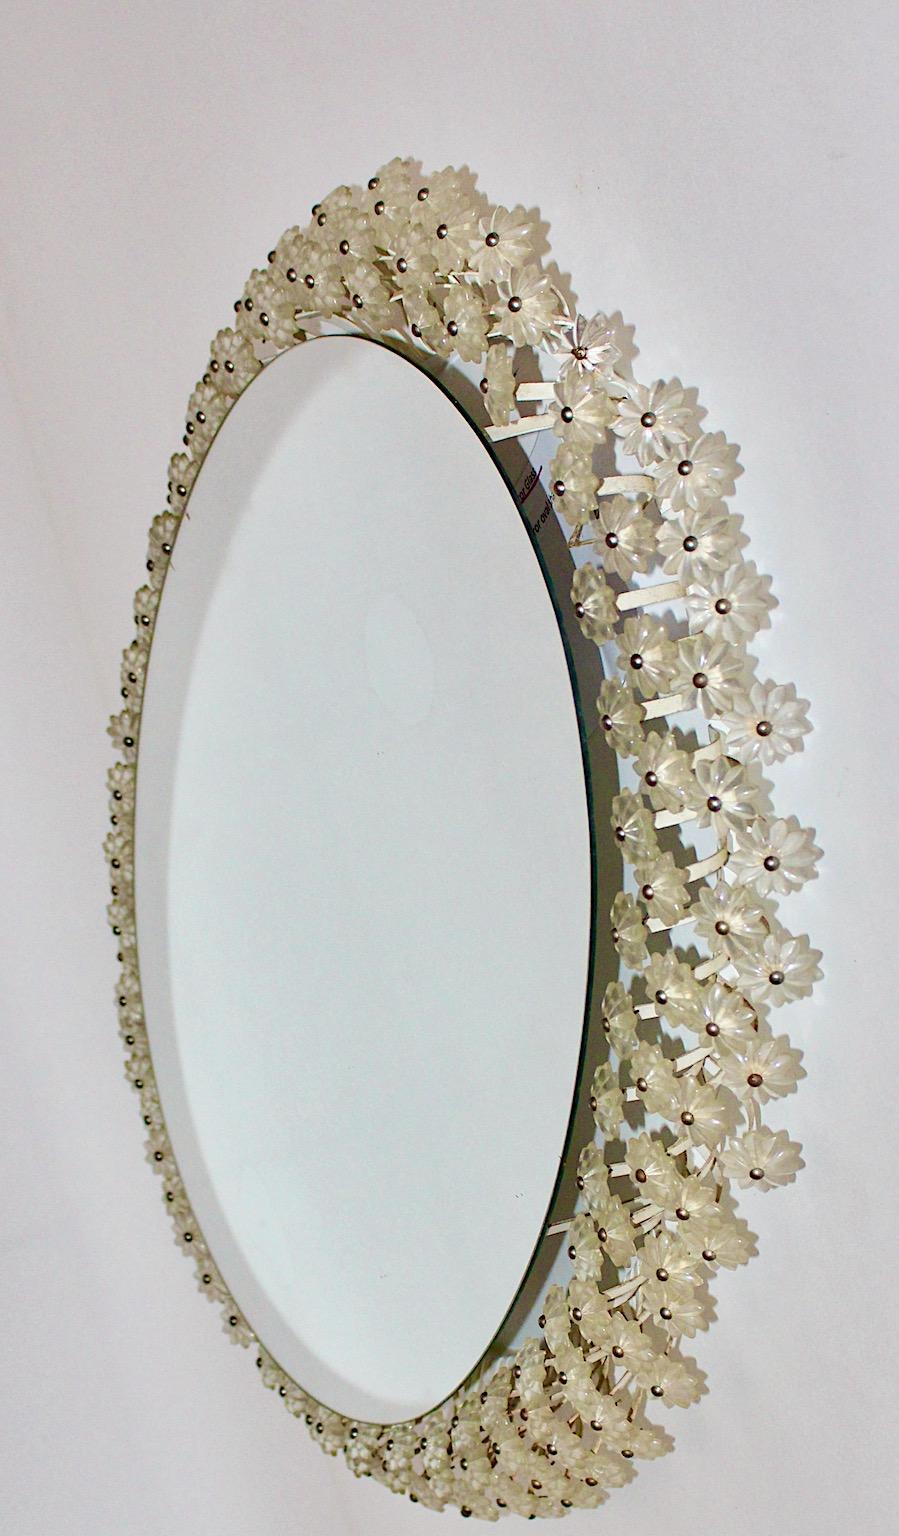 Lucite Flowers Vintage Backlit Wall Mirror Mid-Century Modern Emil Stejnar 1950s In Good Condition For Sale In Vienna, AT